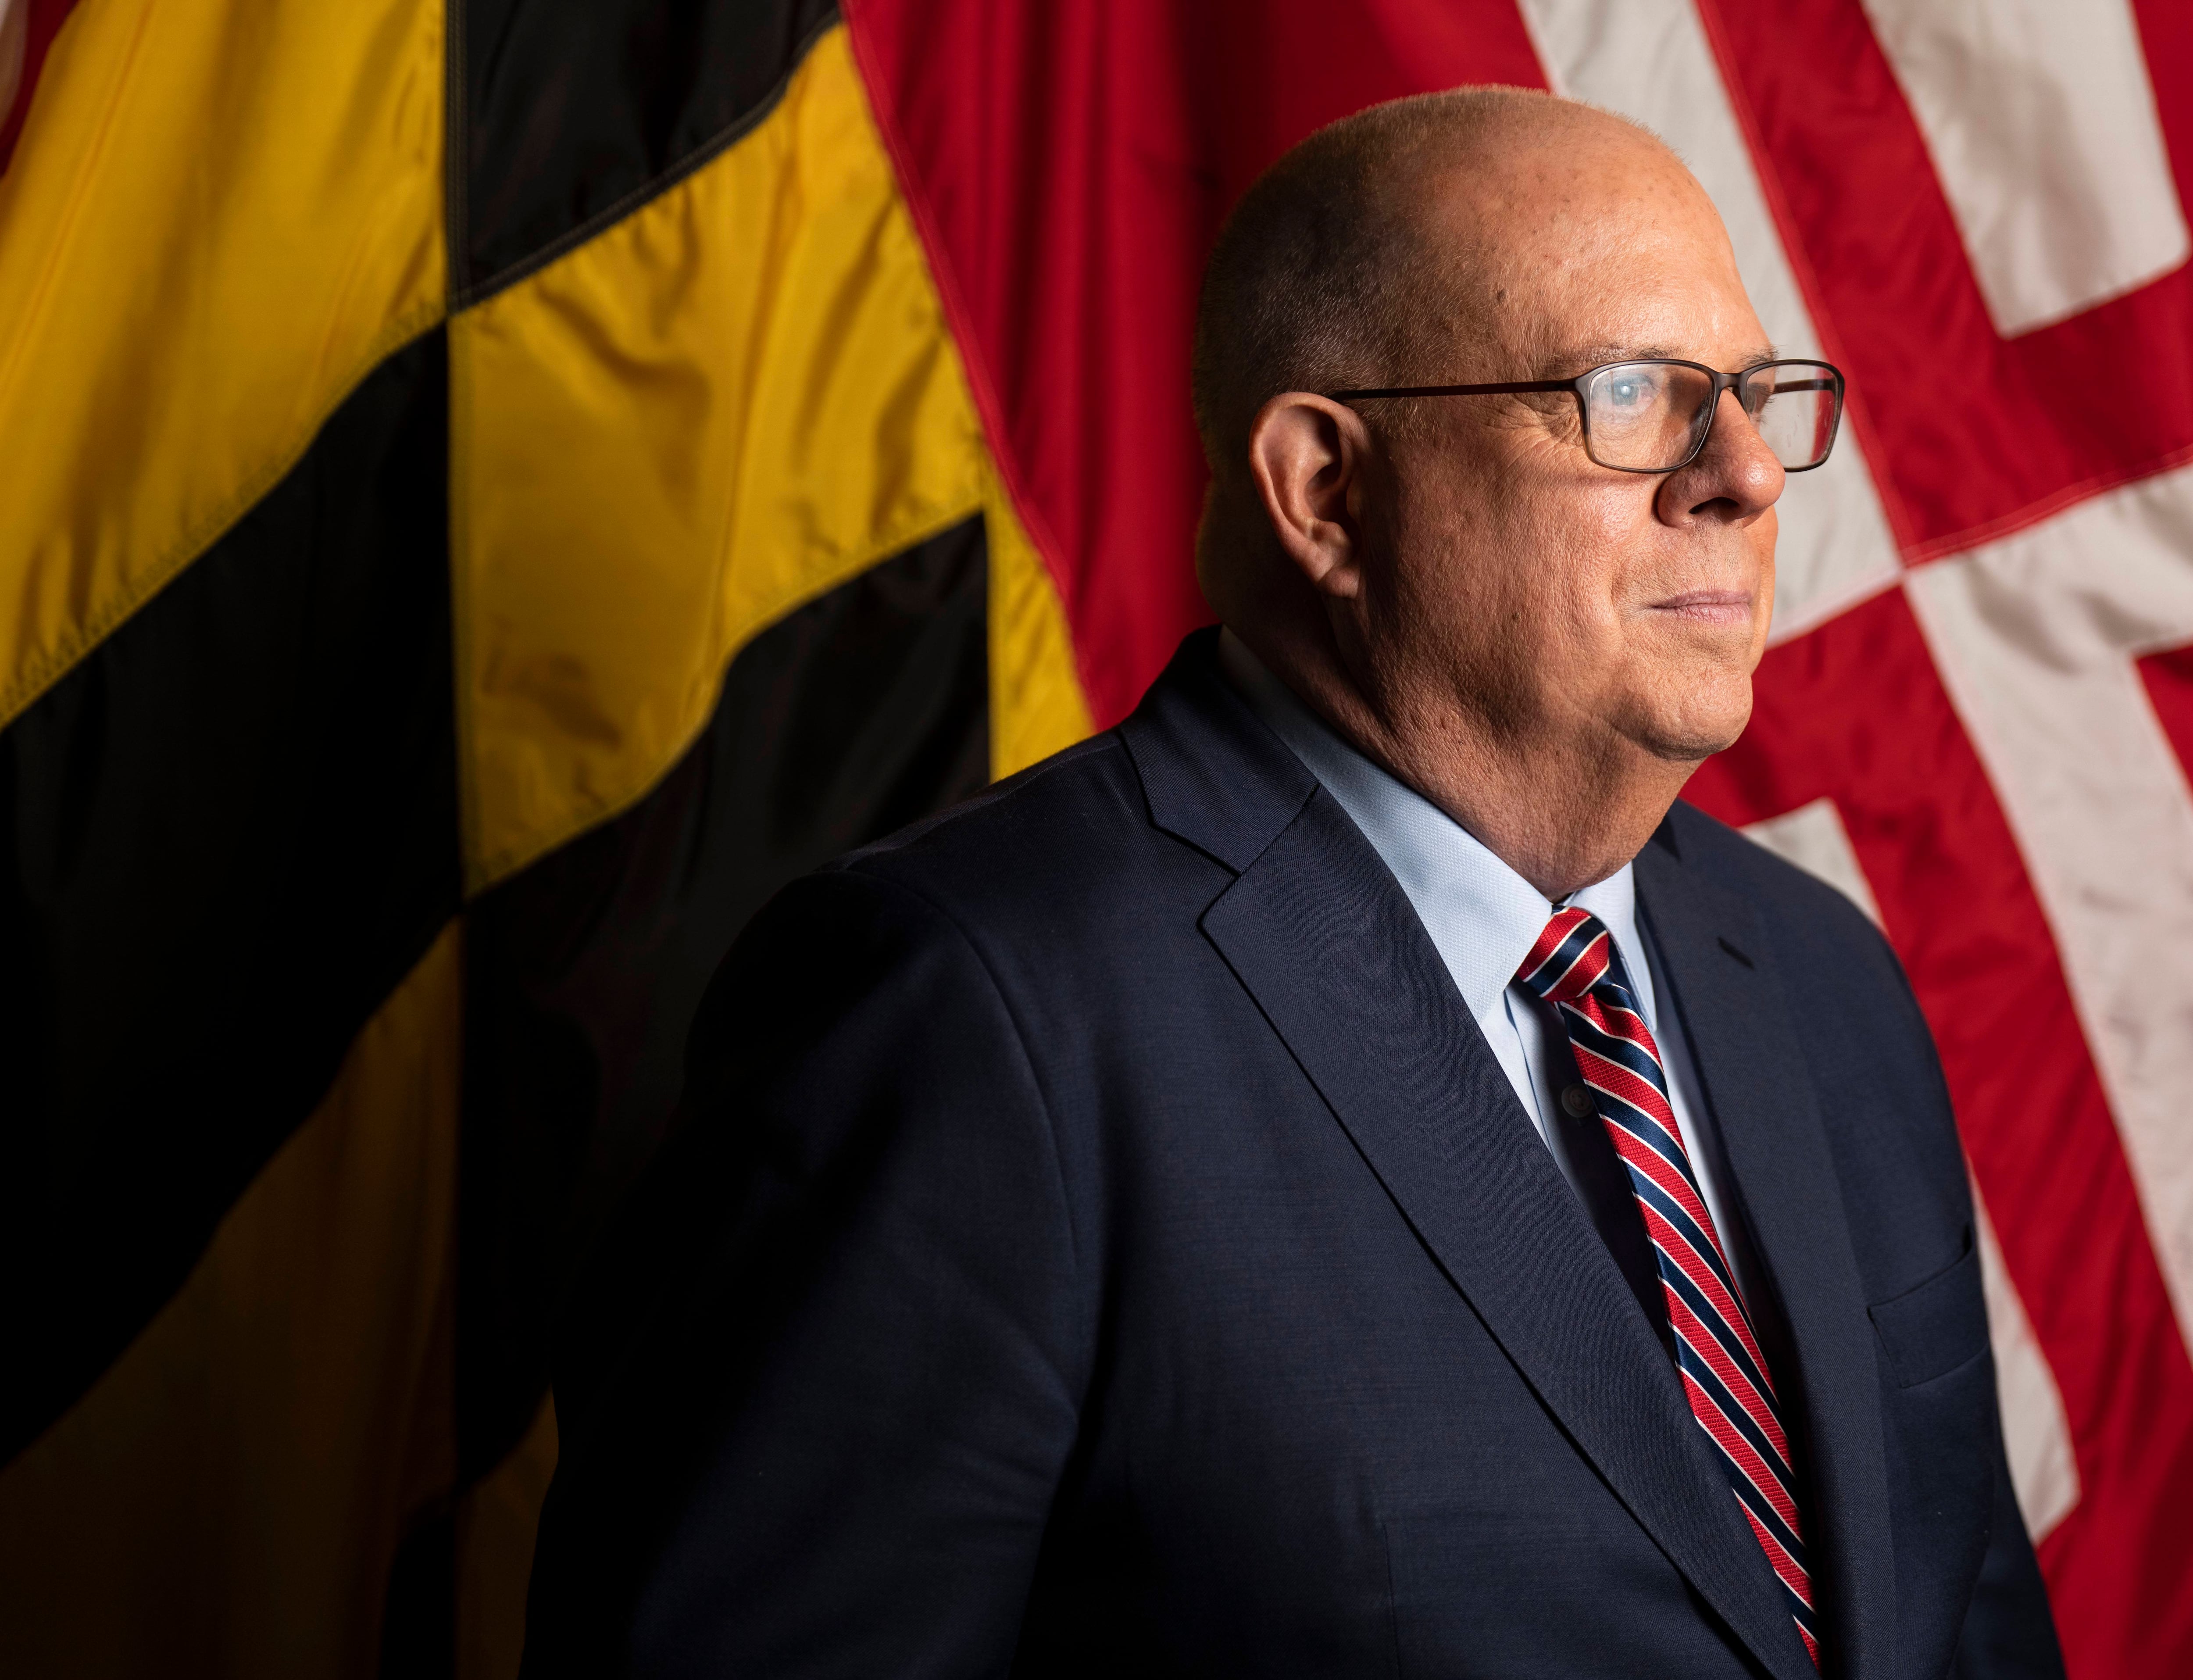 Maryland Gov. Larry Hogan poses for a portrait at the State House in Annapolis, Monday, December 19, 2022.